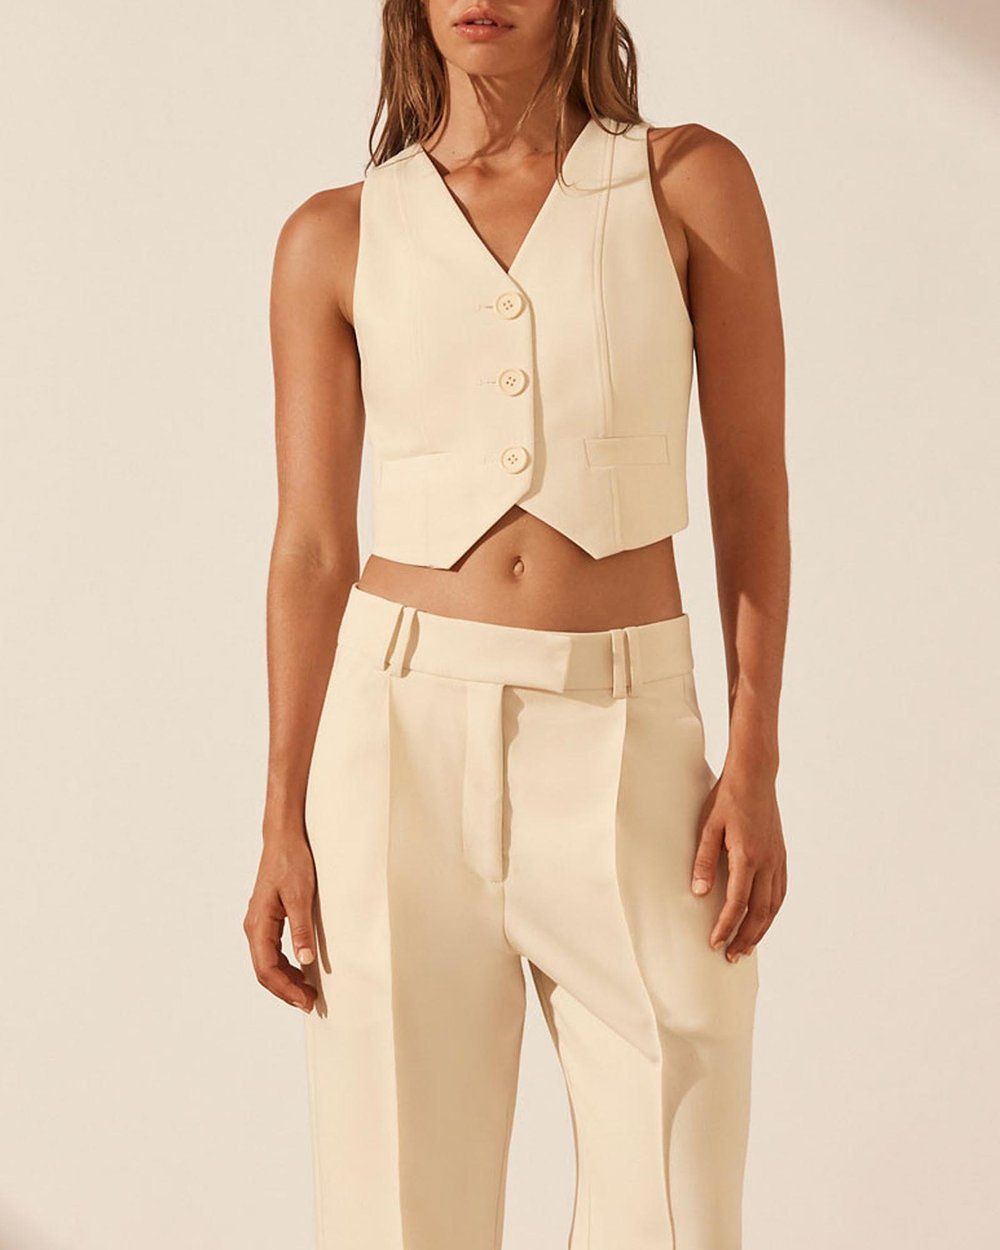 Irena Tailored Fitted Vest | THE ICONIC (AU & NZ)